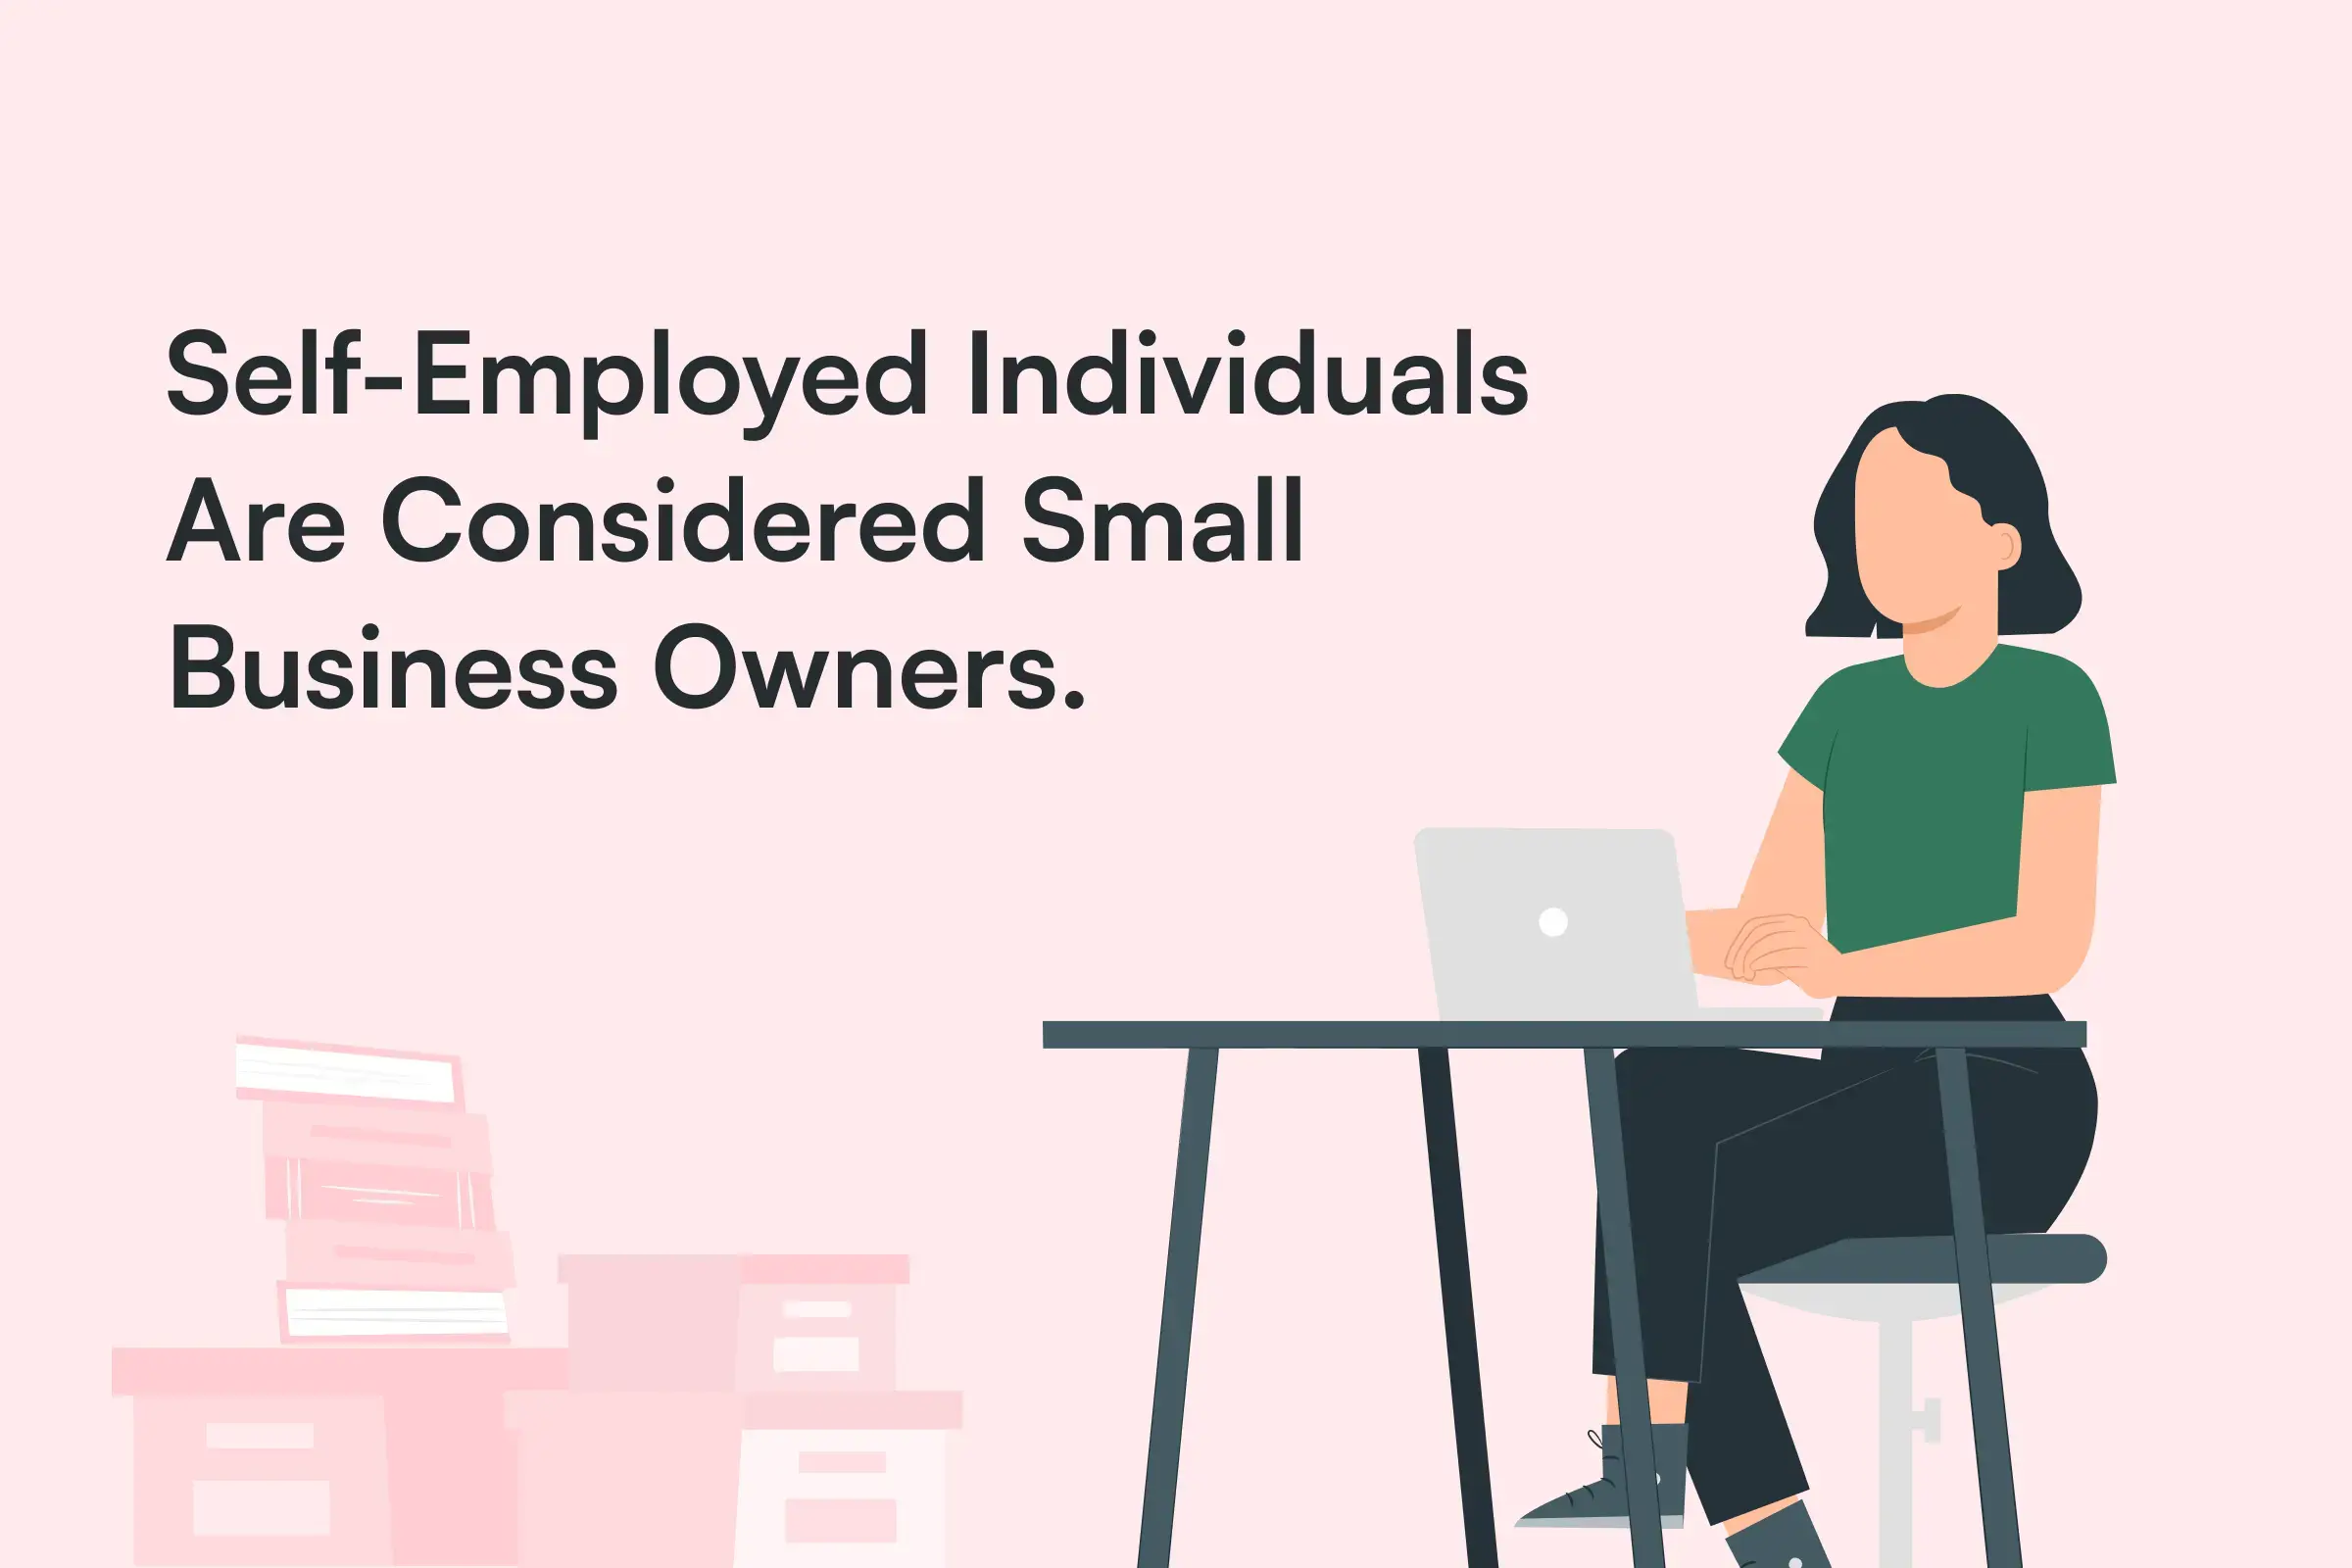 Self employed individuals are considered small business owners